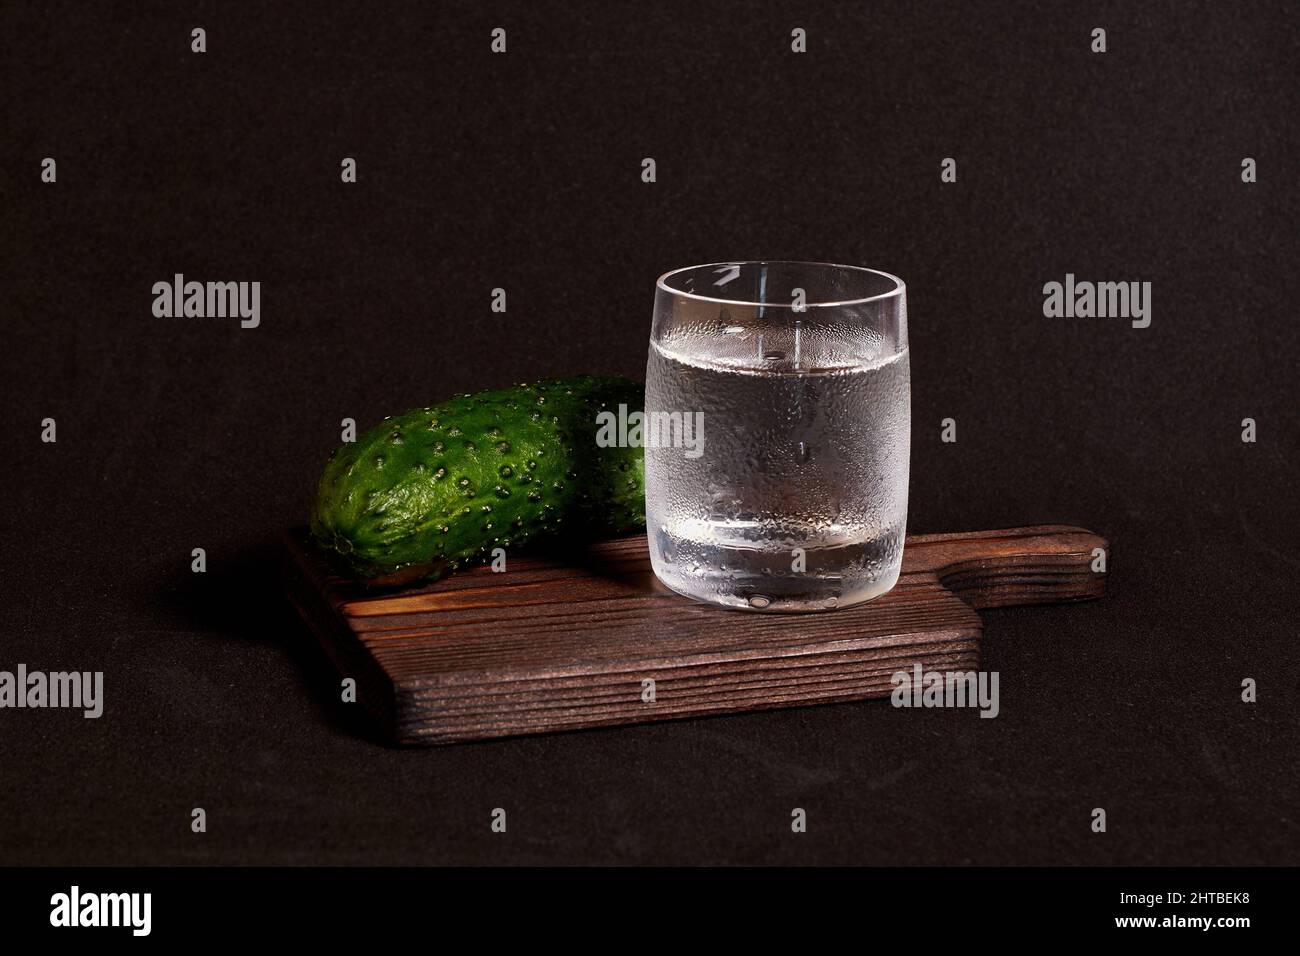 A glass of vodka and a fresh cucumber on a wooden stand  Stock Photo